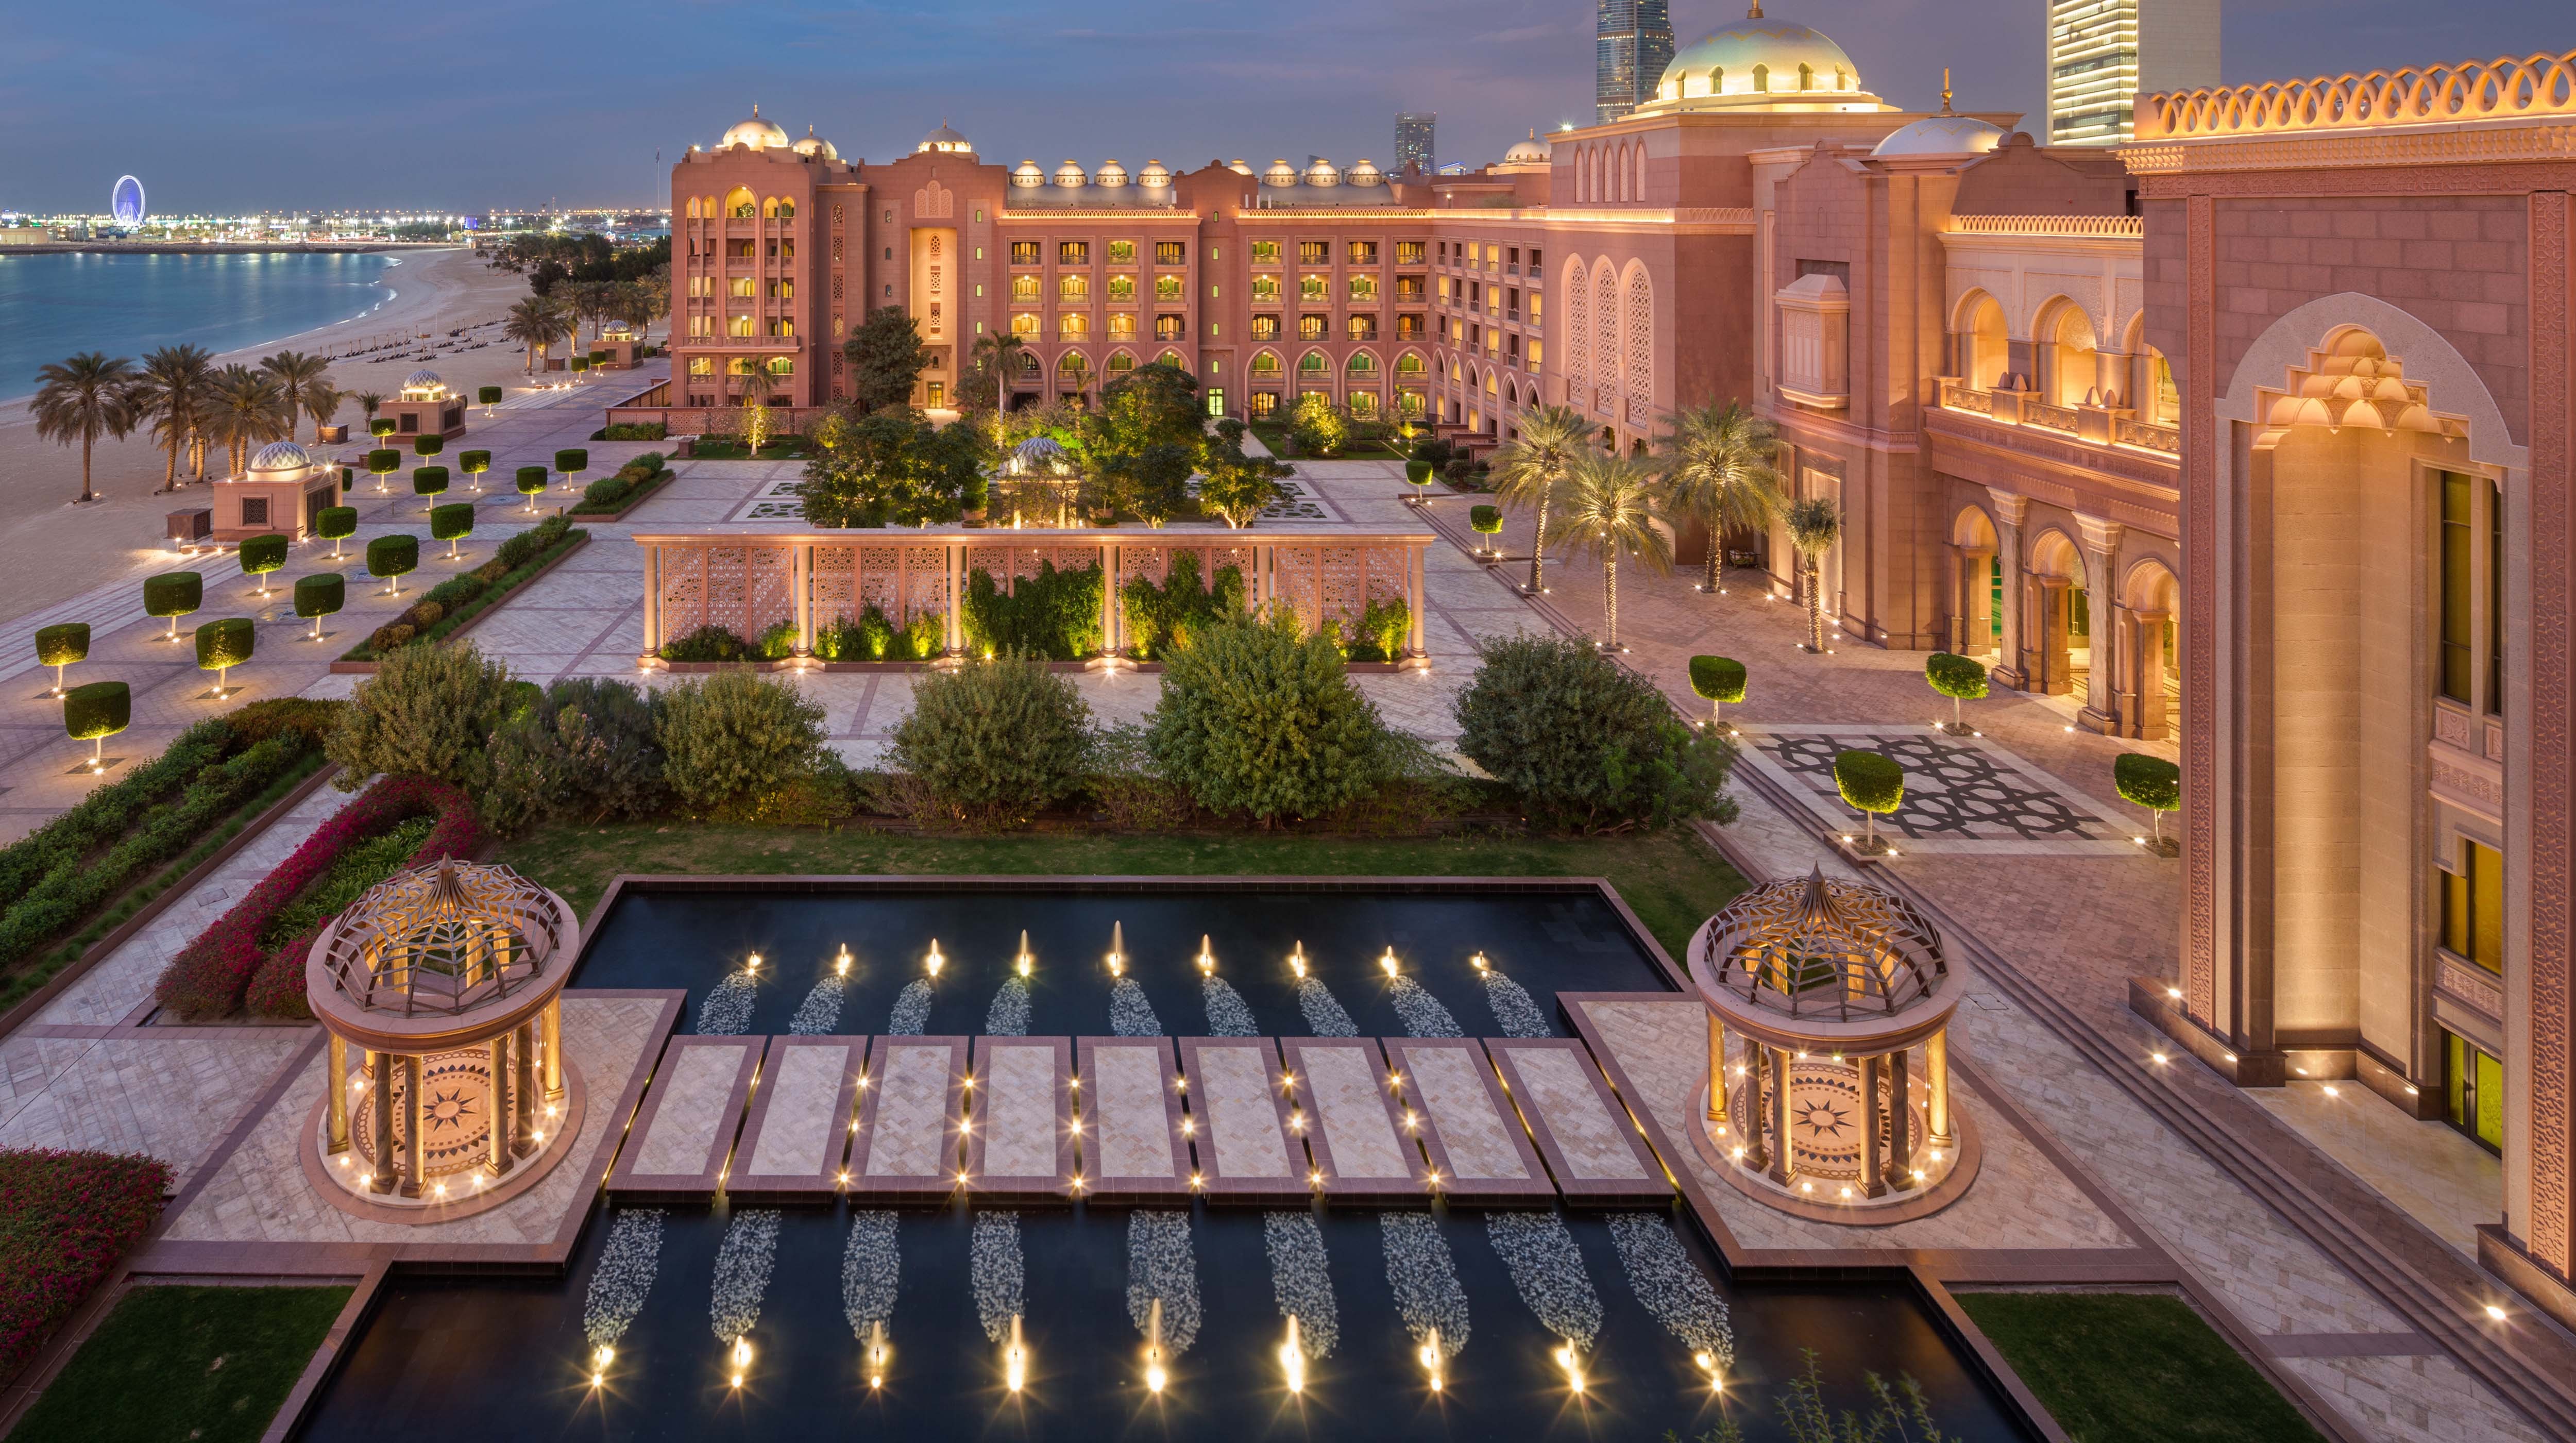 Abu Dhabi’s Most Luxurious Hotels